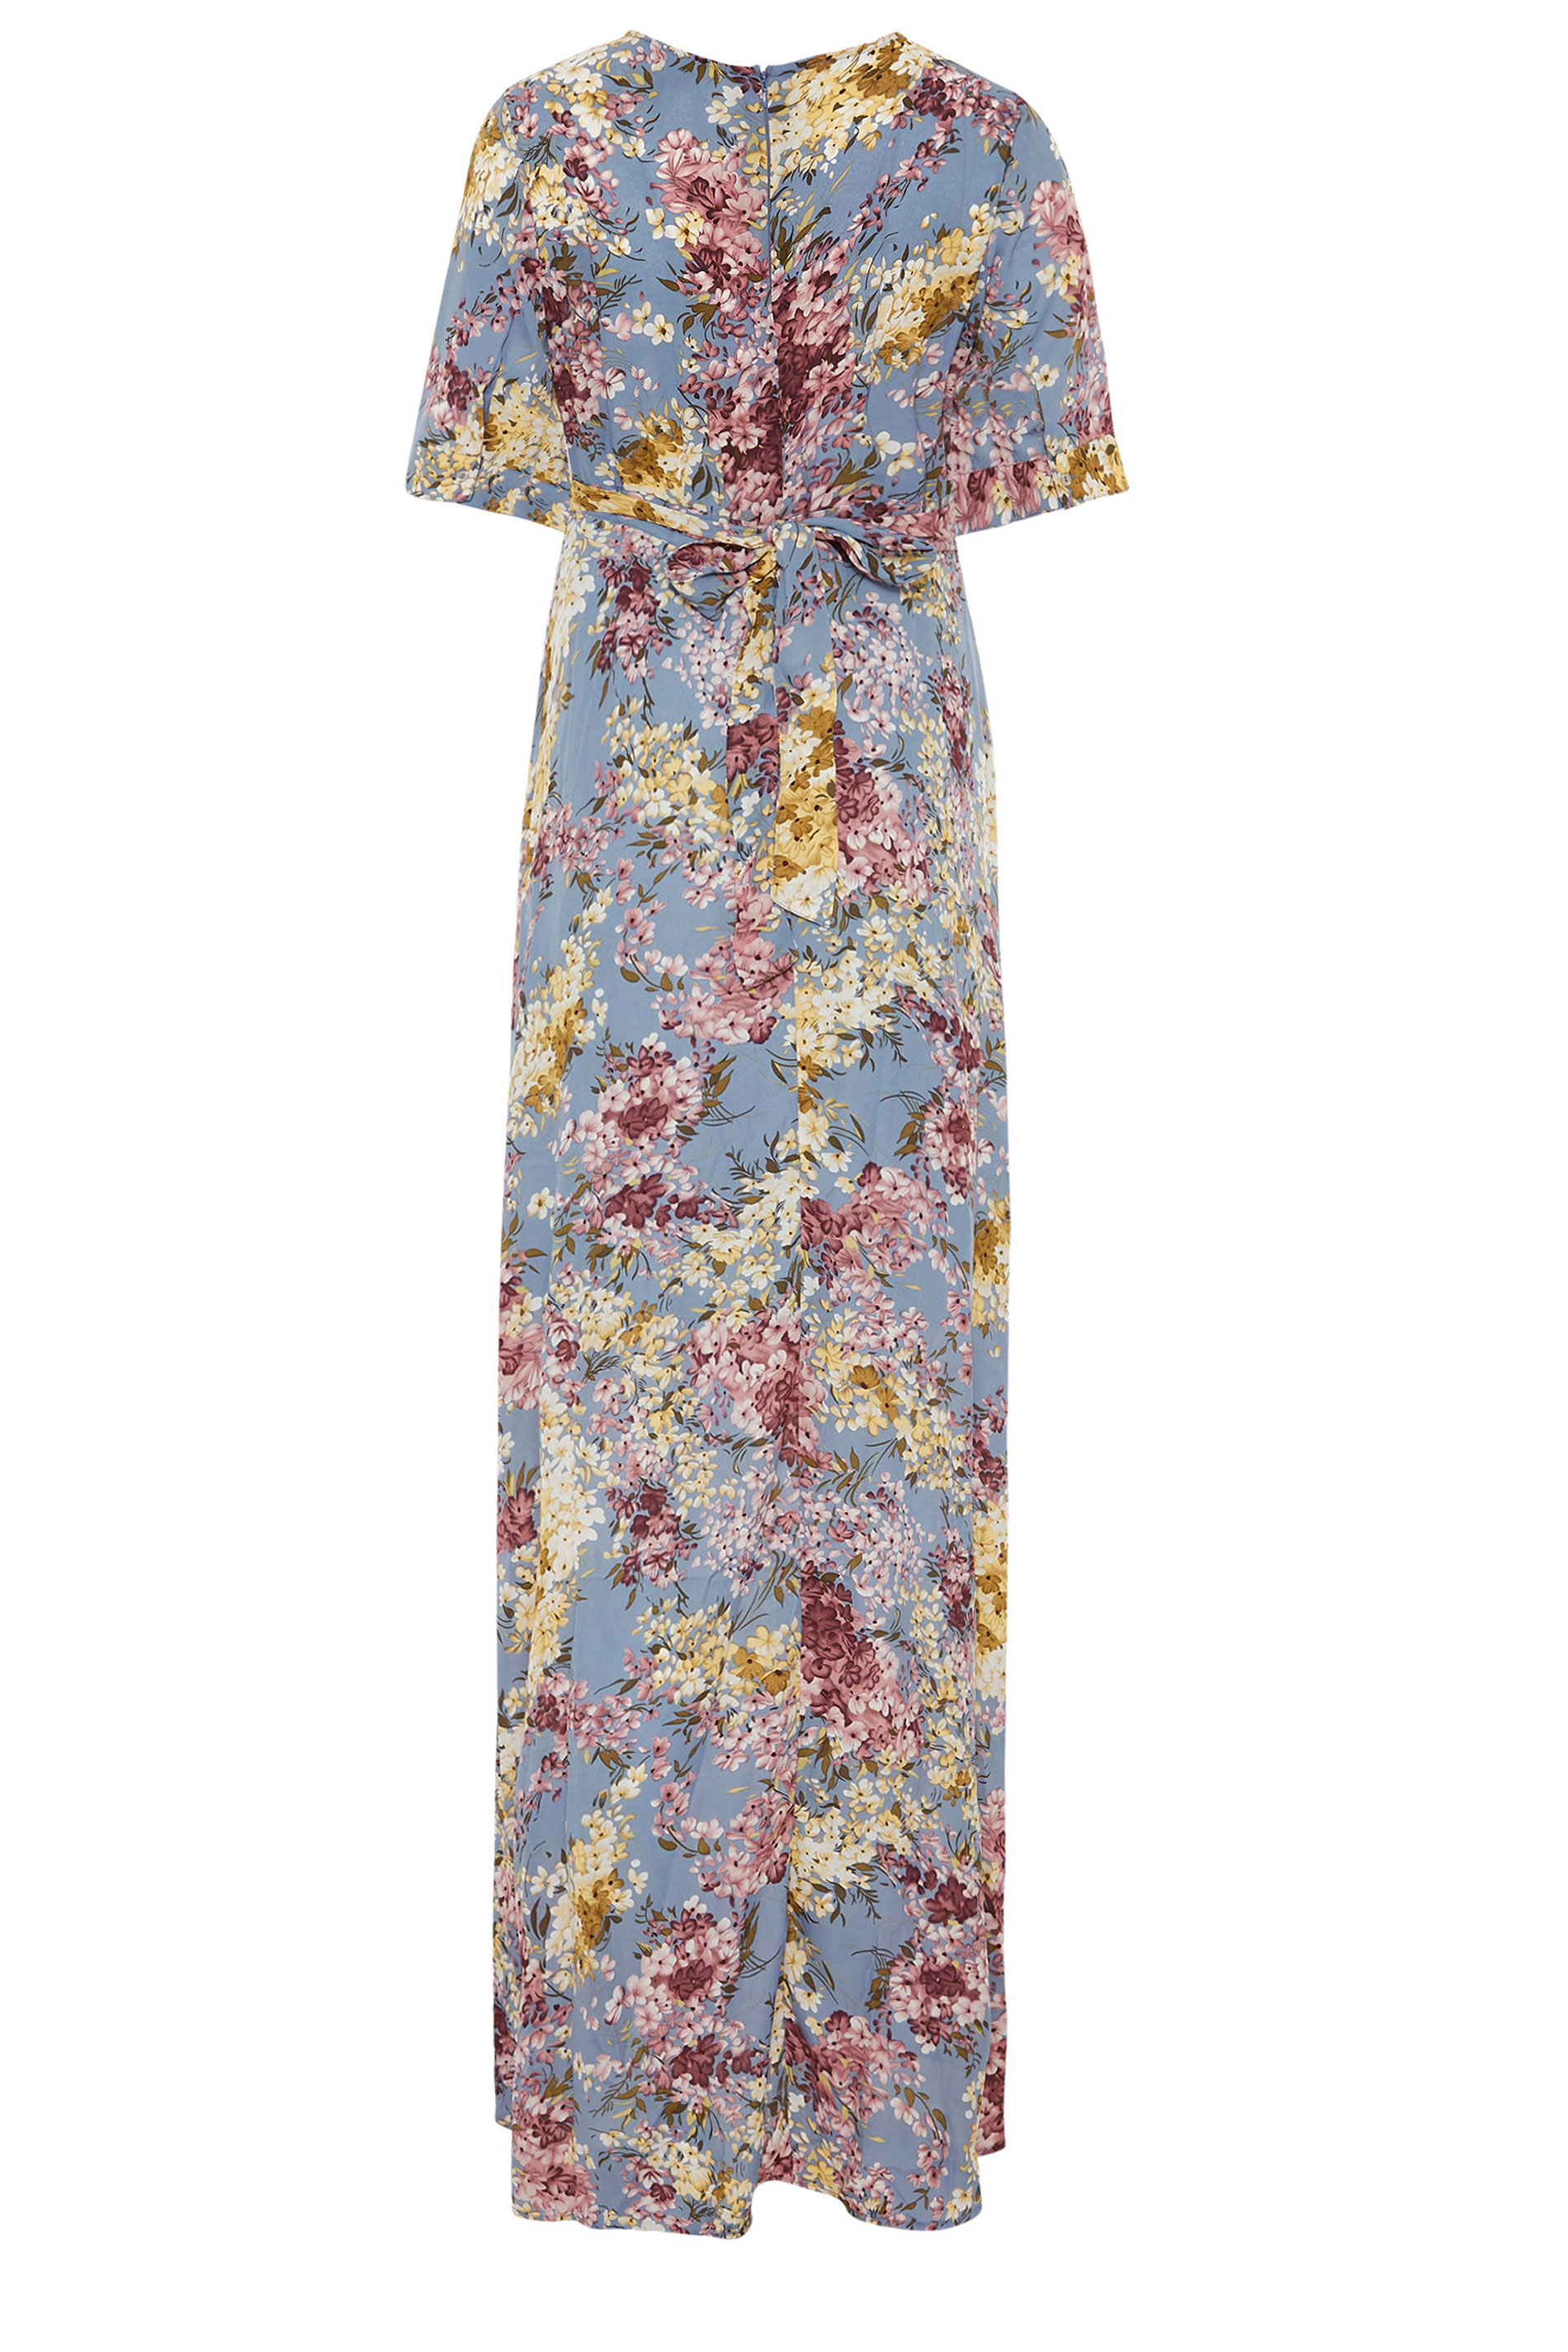 LTS Blue Floral Wrap Front Maxi Dress | Long Tall Sally